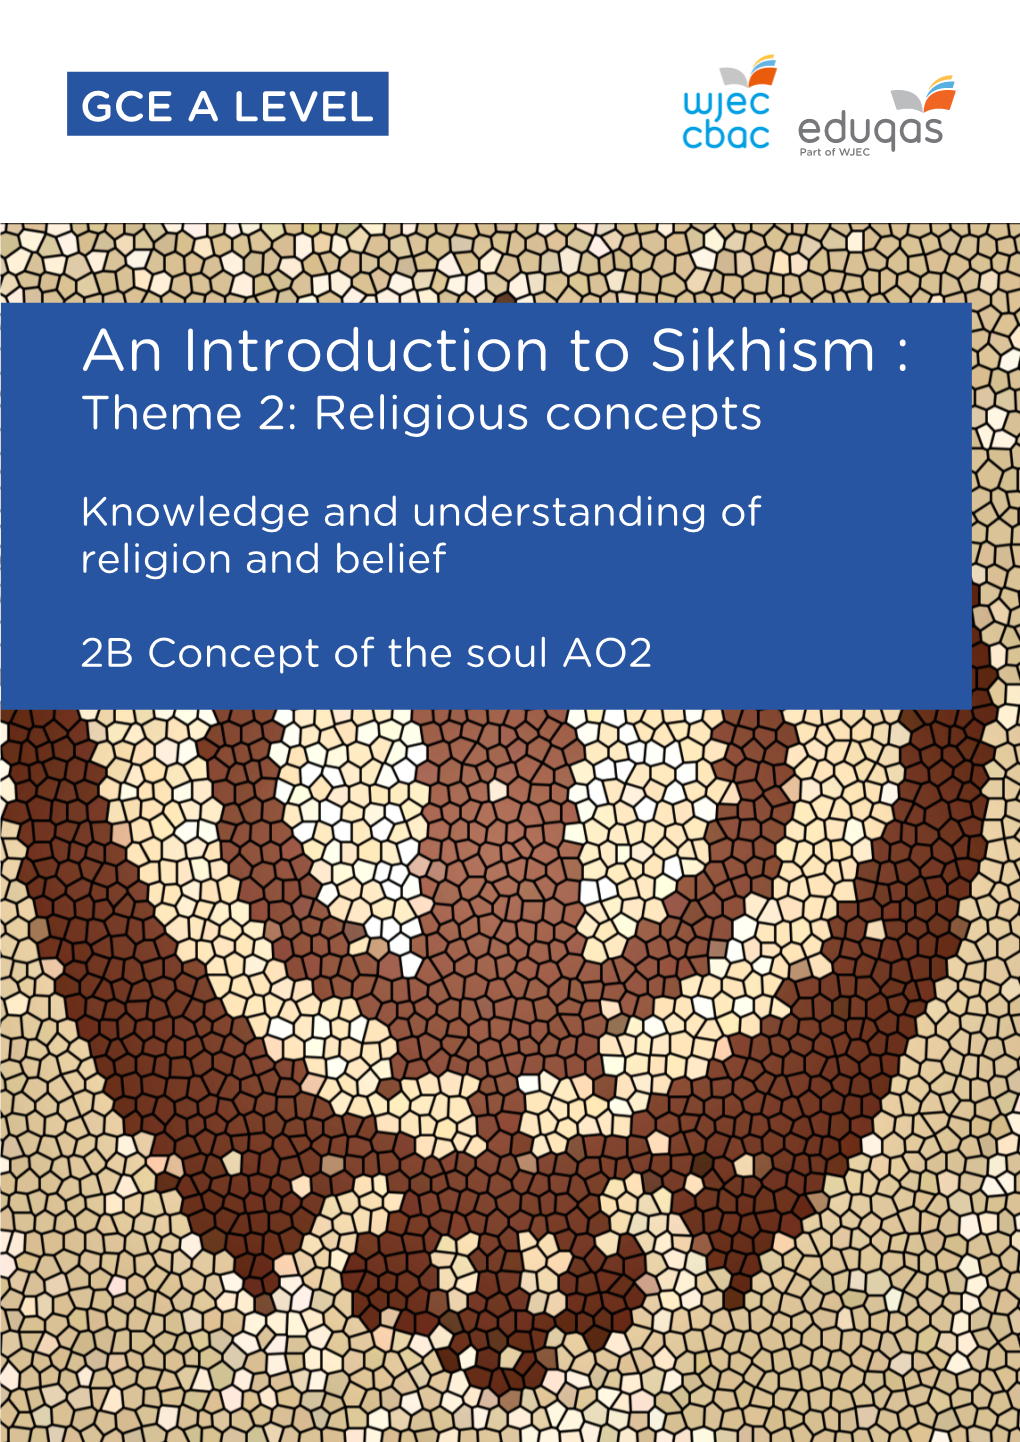 An Introduction to Sikhism : Theme 2: Religious Concepts